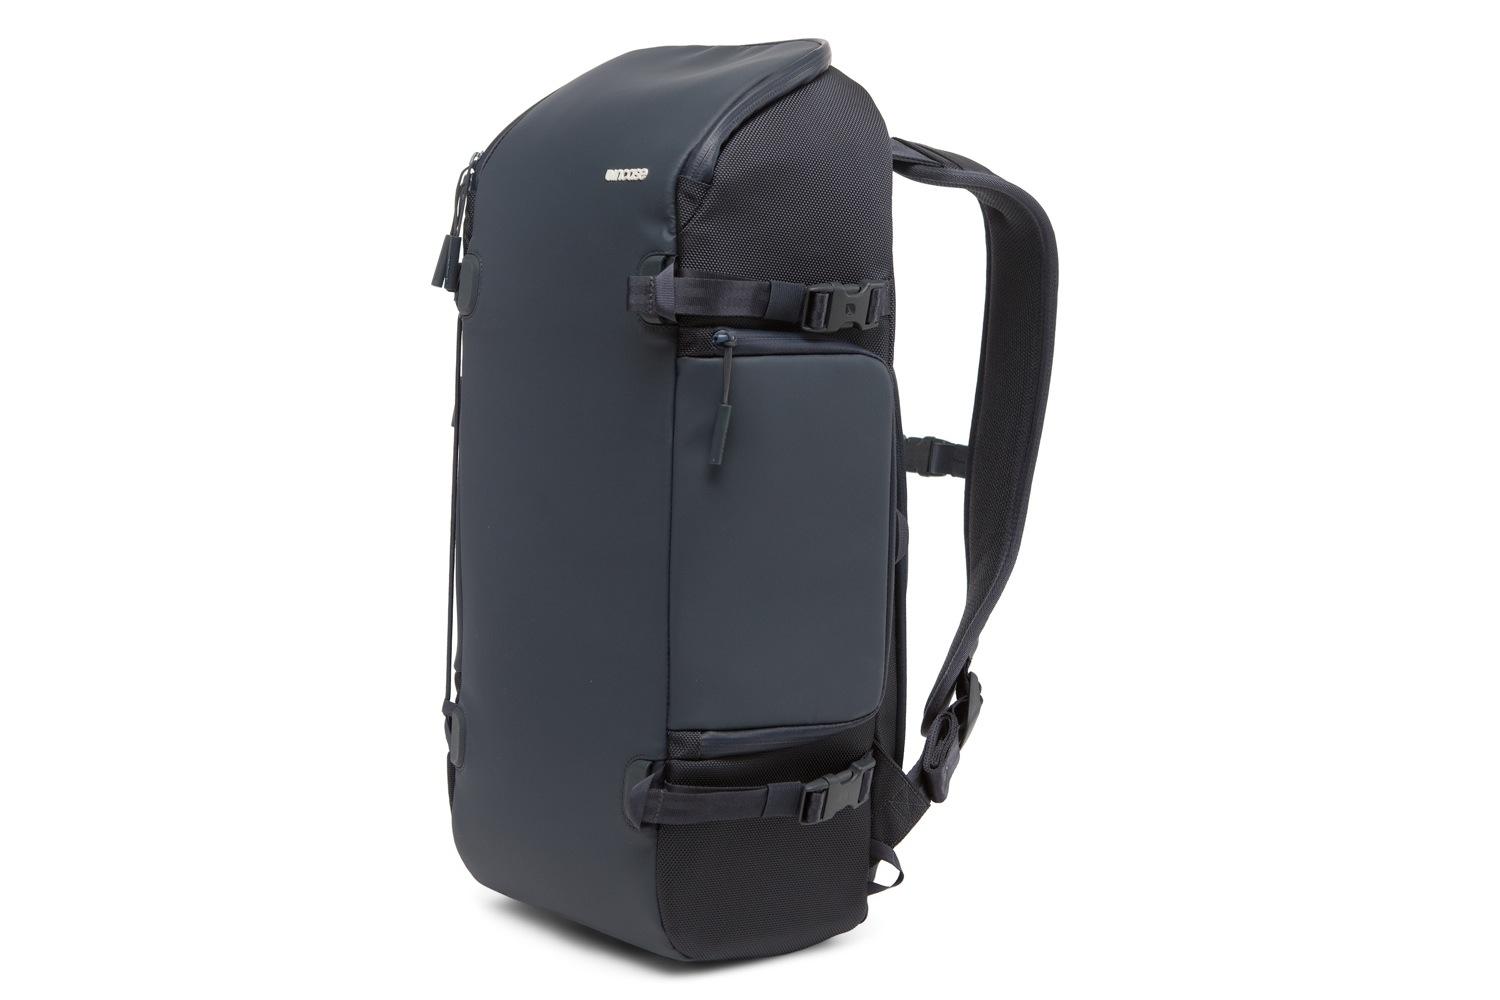 incases new gopro backpack pays homage to pro surfer kelly slater incase 1